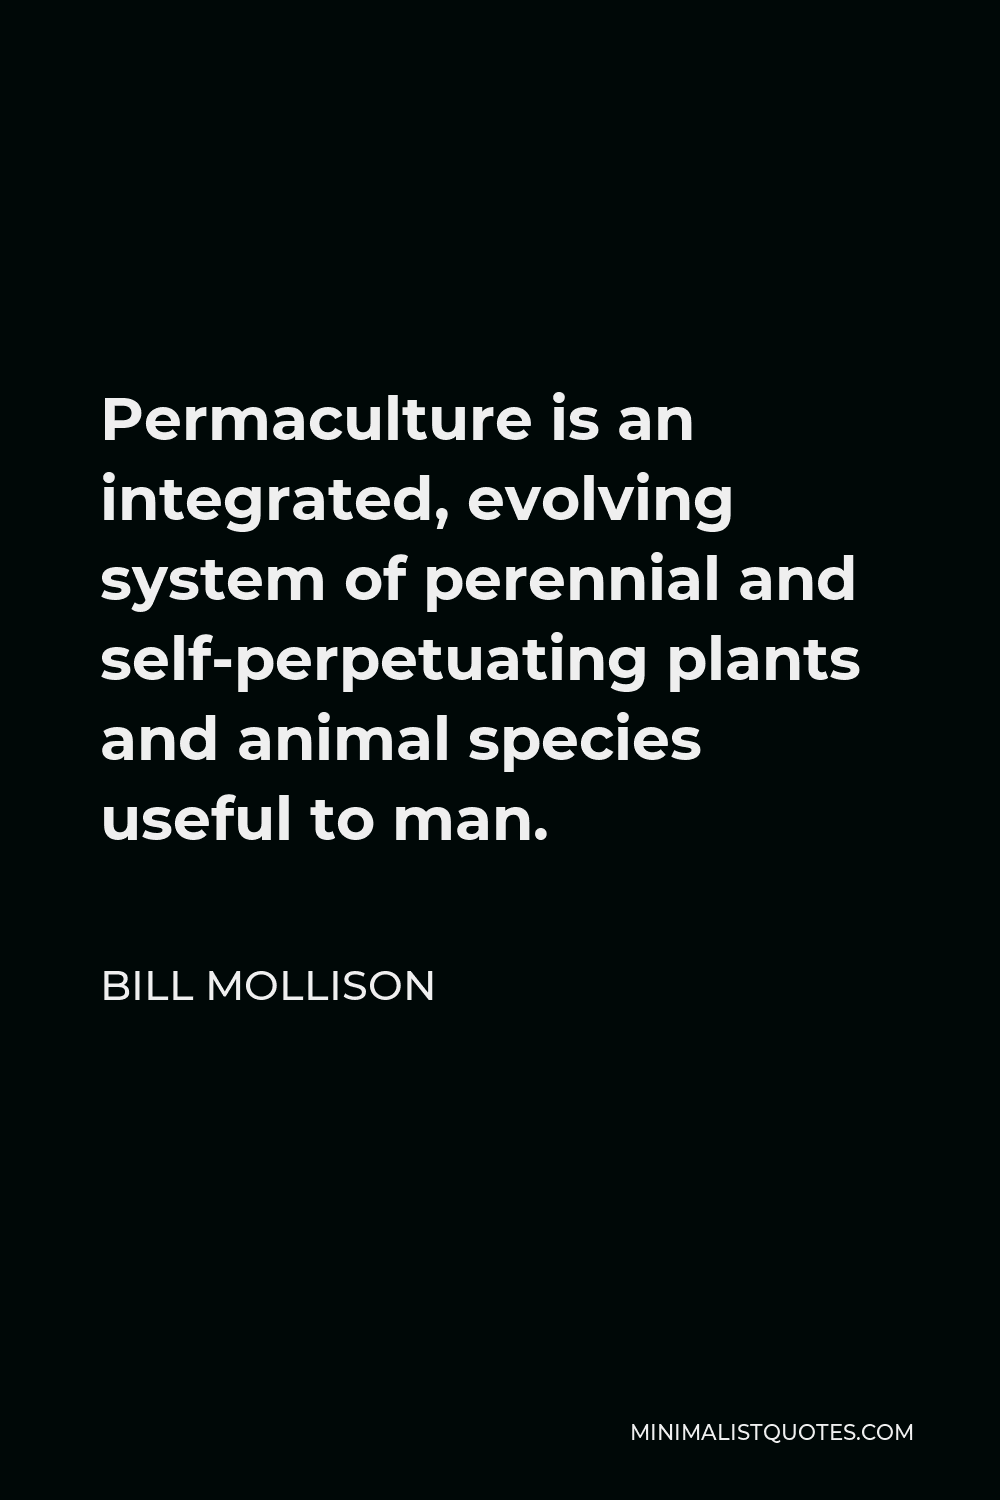 Bill Mollison Quote - Permaculture is an integrated, evolving system of perennial and self-perpetuating plants and animal species useful to man.